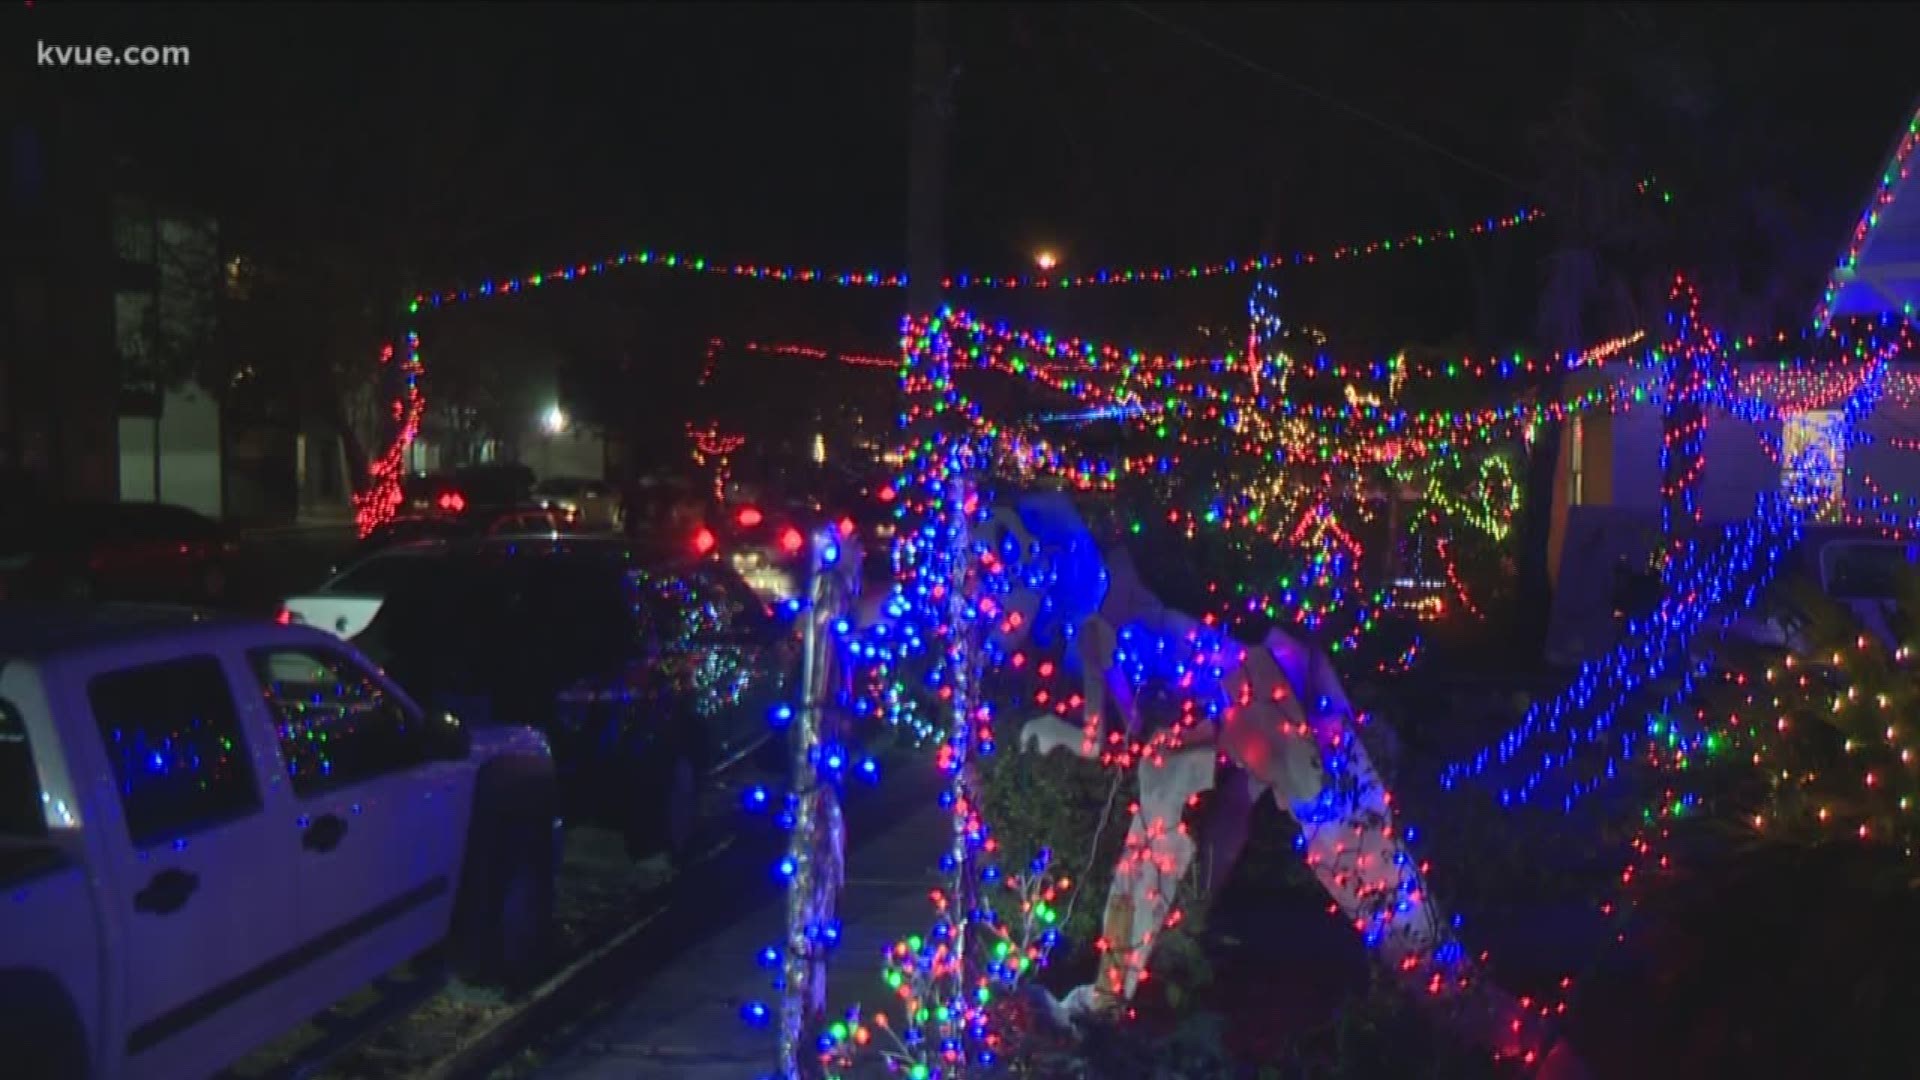 Call it a miracle on 37th Street. Austin's sweetest holiday tradition is making a comeback just in time for Christmas.